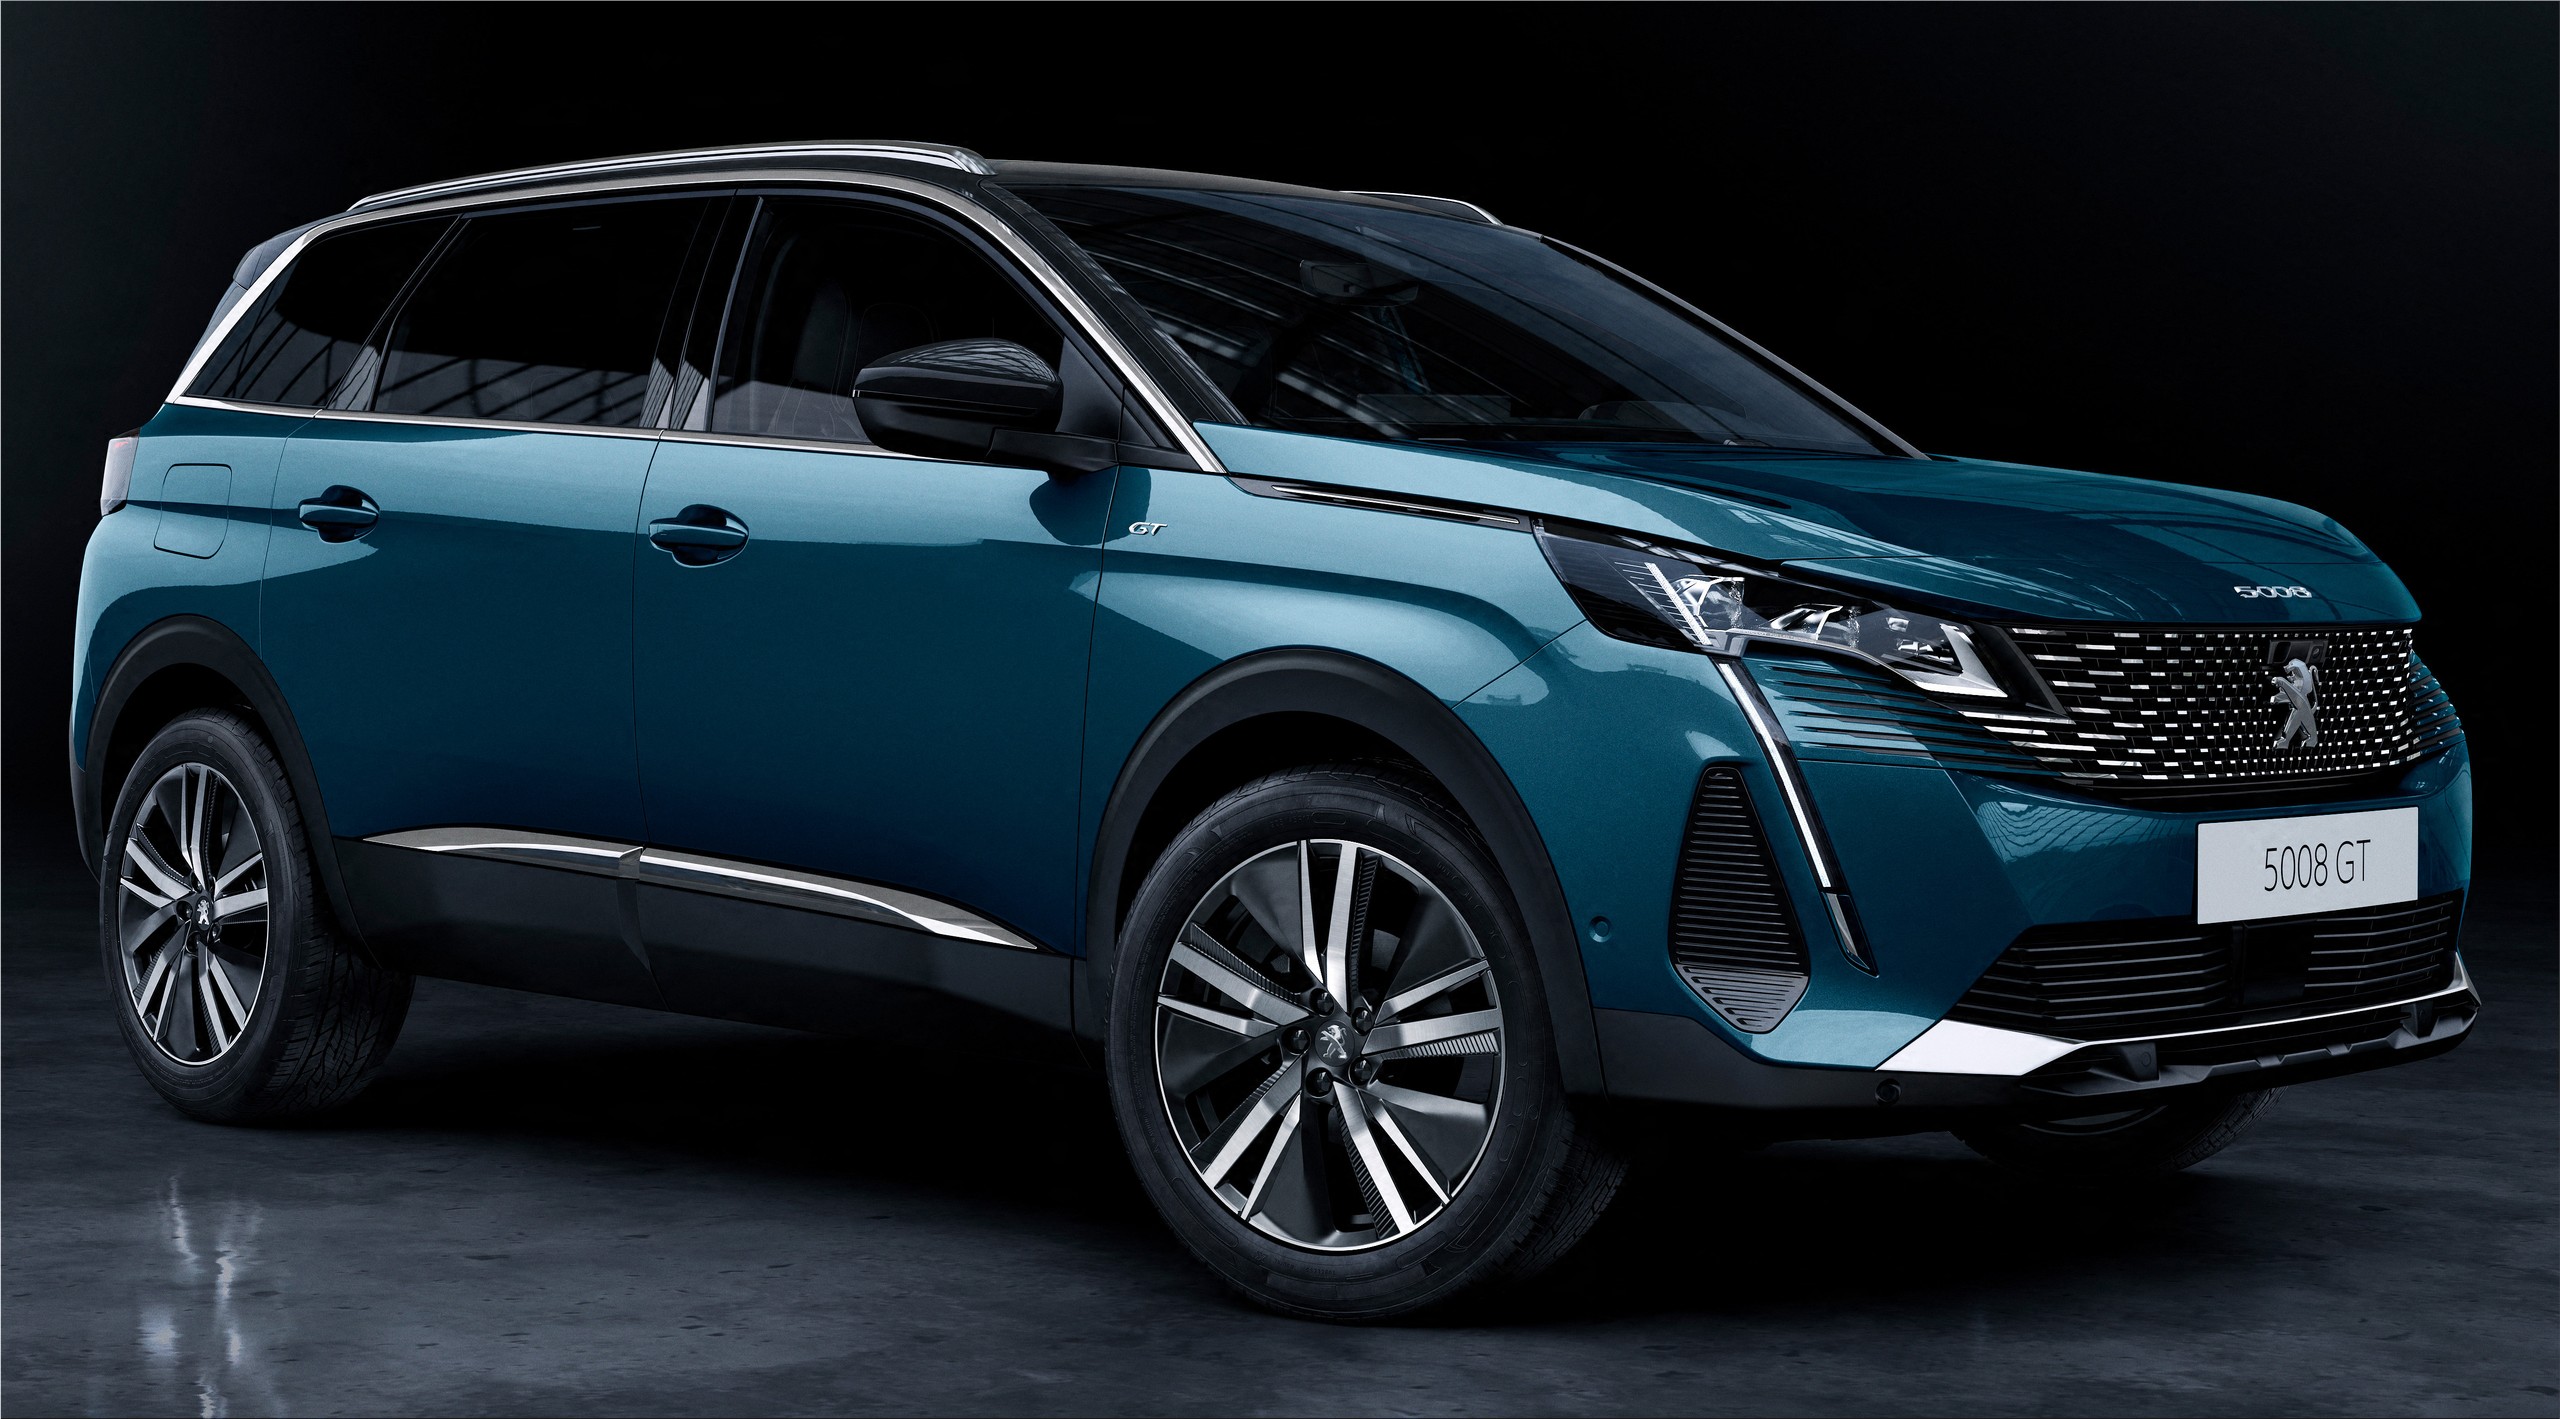 The new Peugeot 5008 SUV offers space for seven people